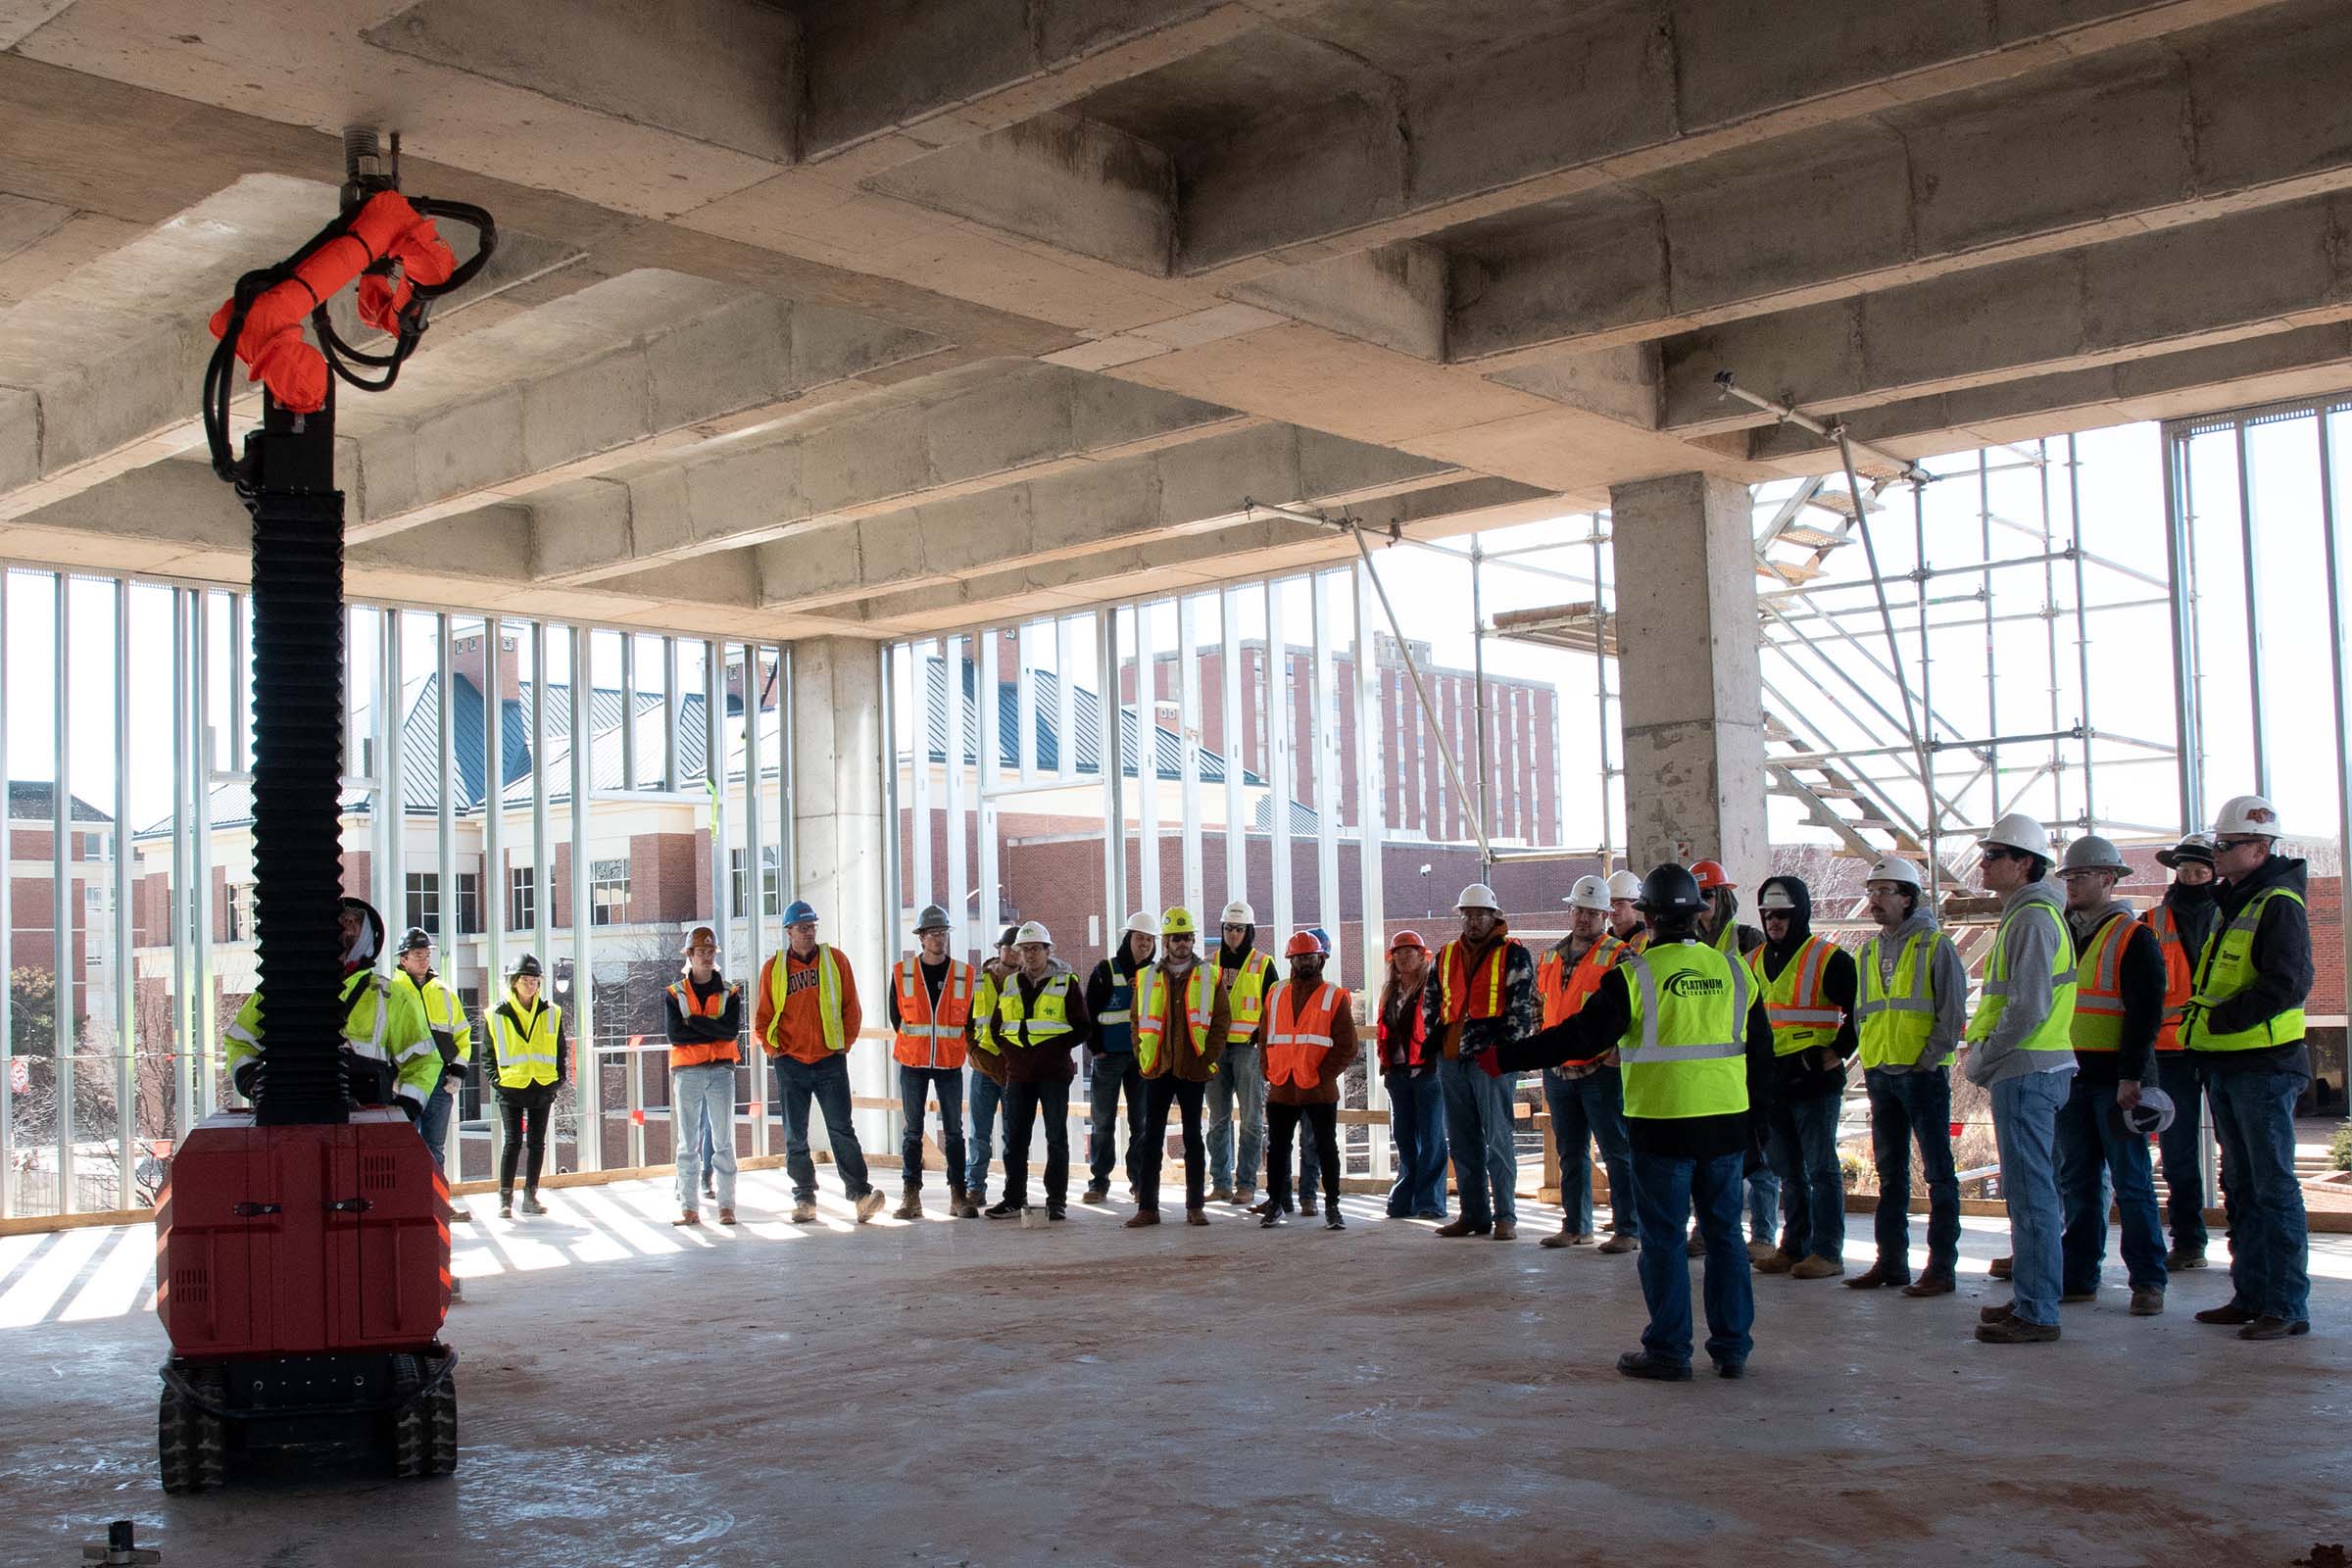 OSU student see the jaibot robot on New Frontiers construction site